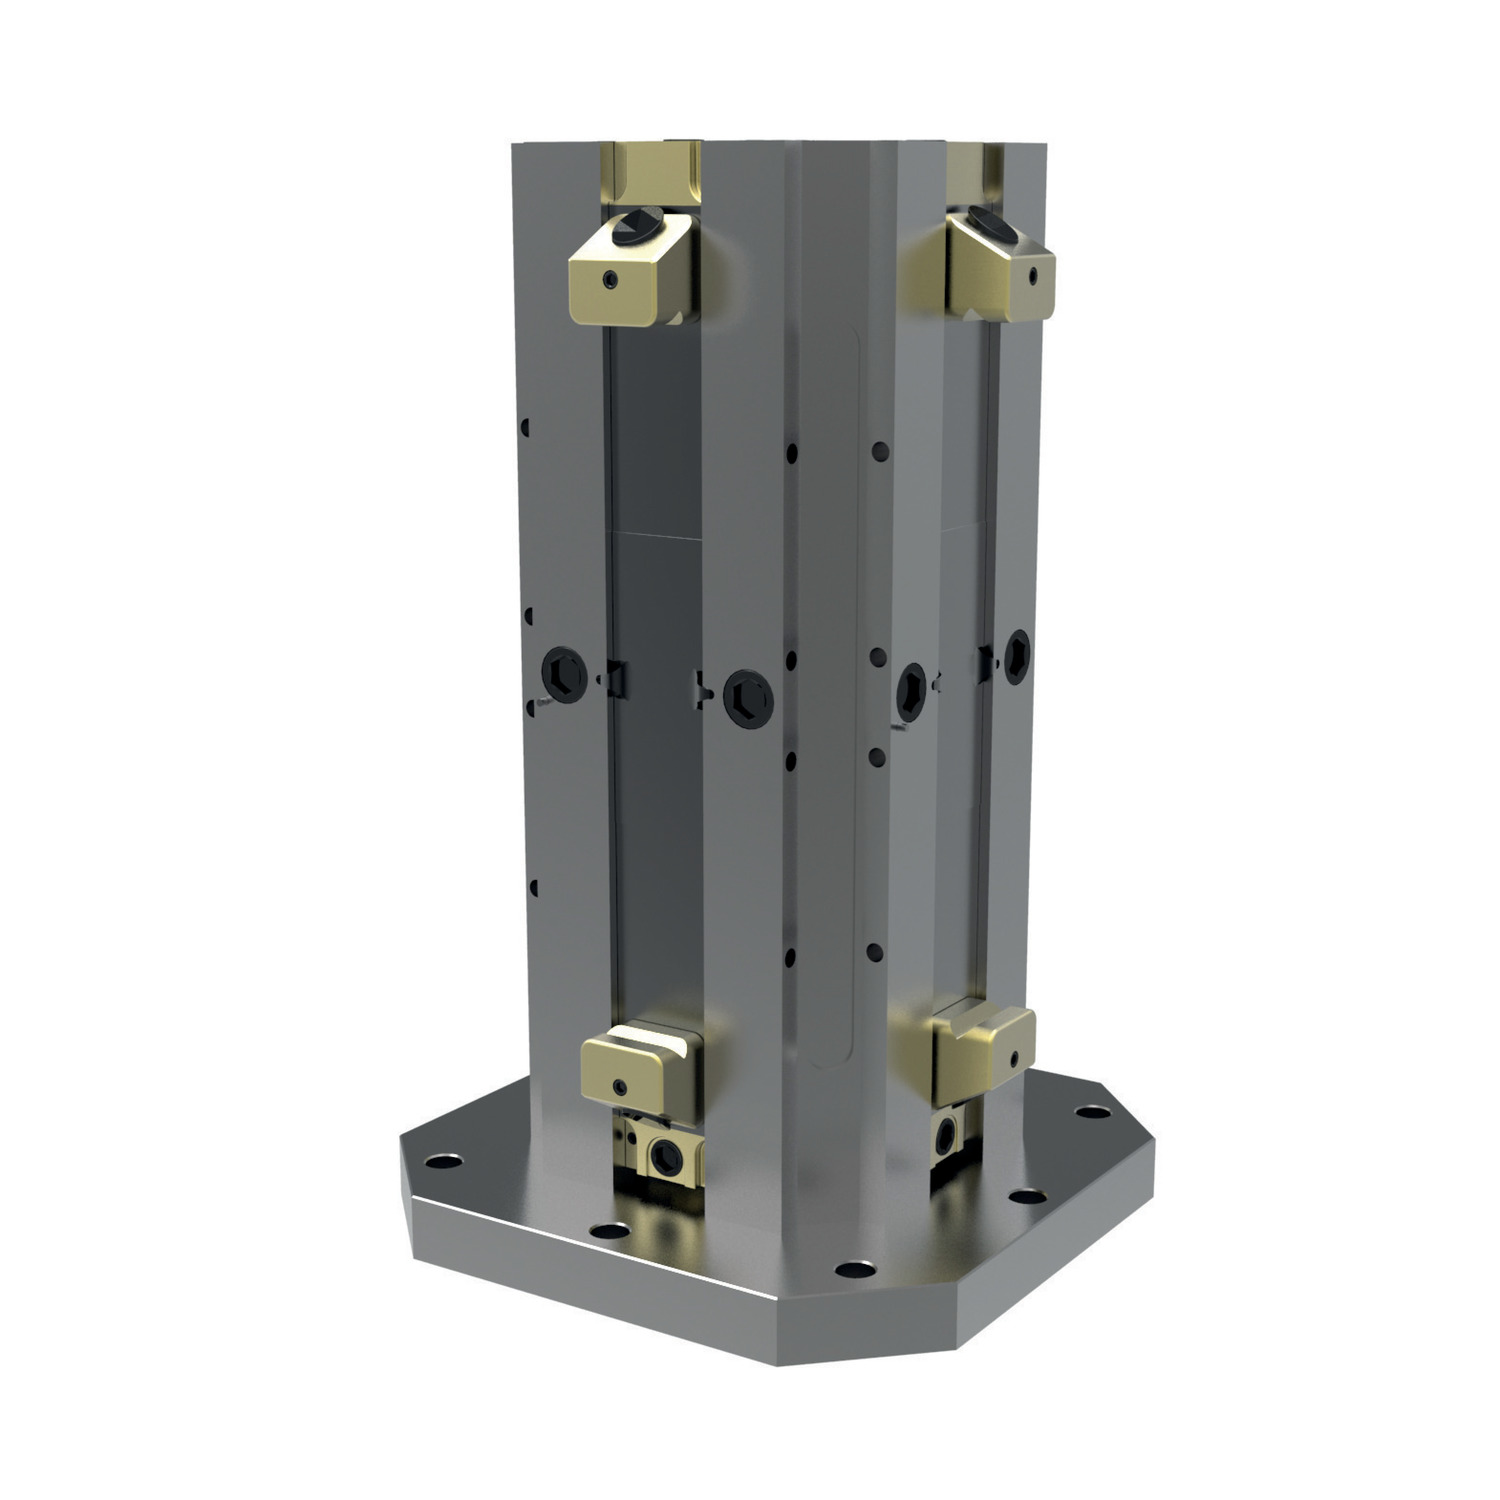 8 Station Vices Combine high manufacturing tolerances with great versatility in 8-station vices.